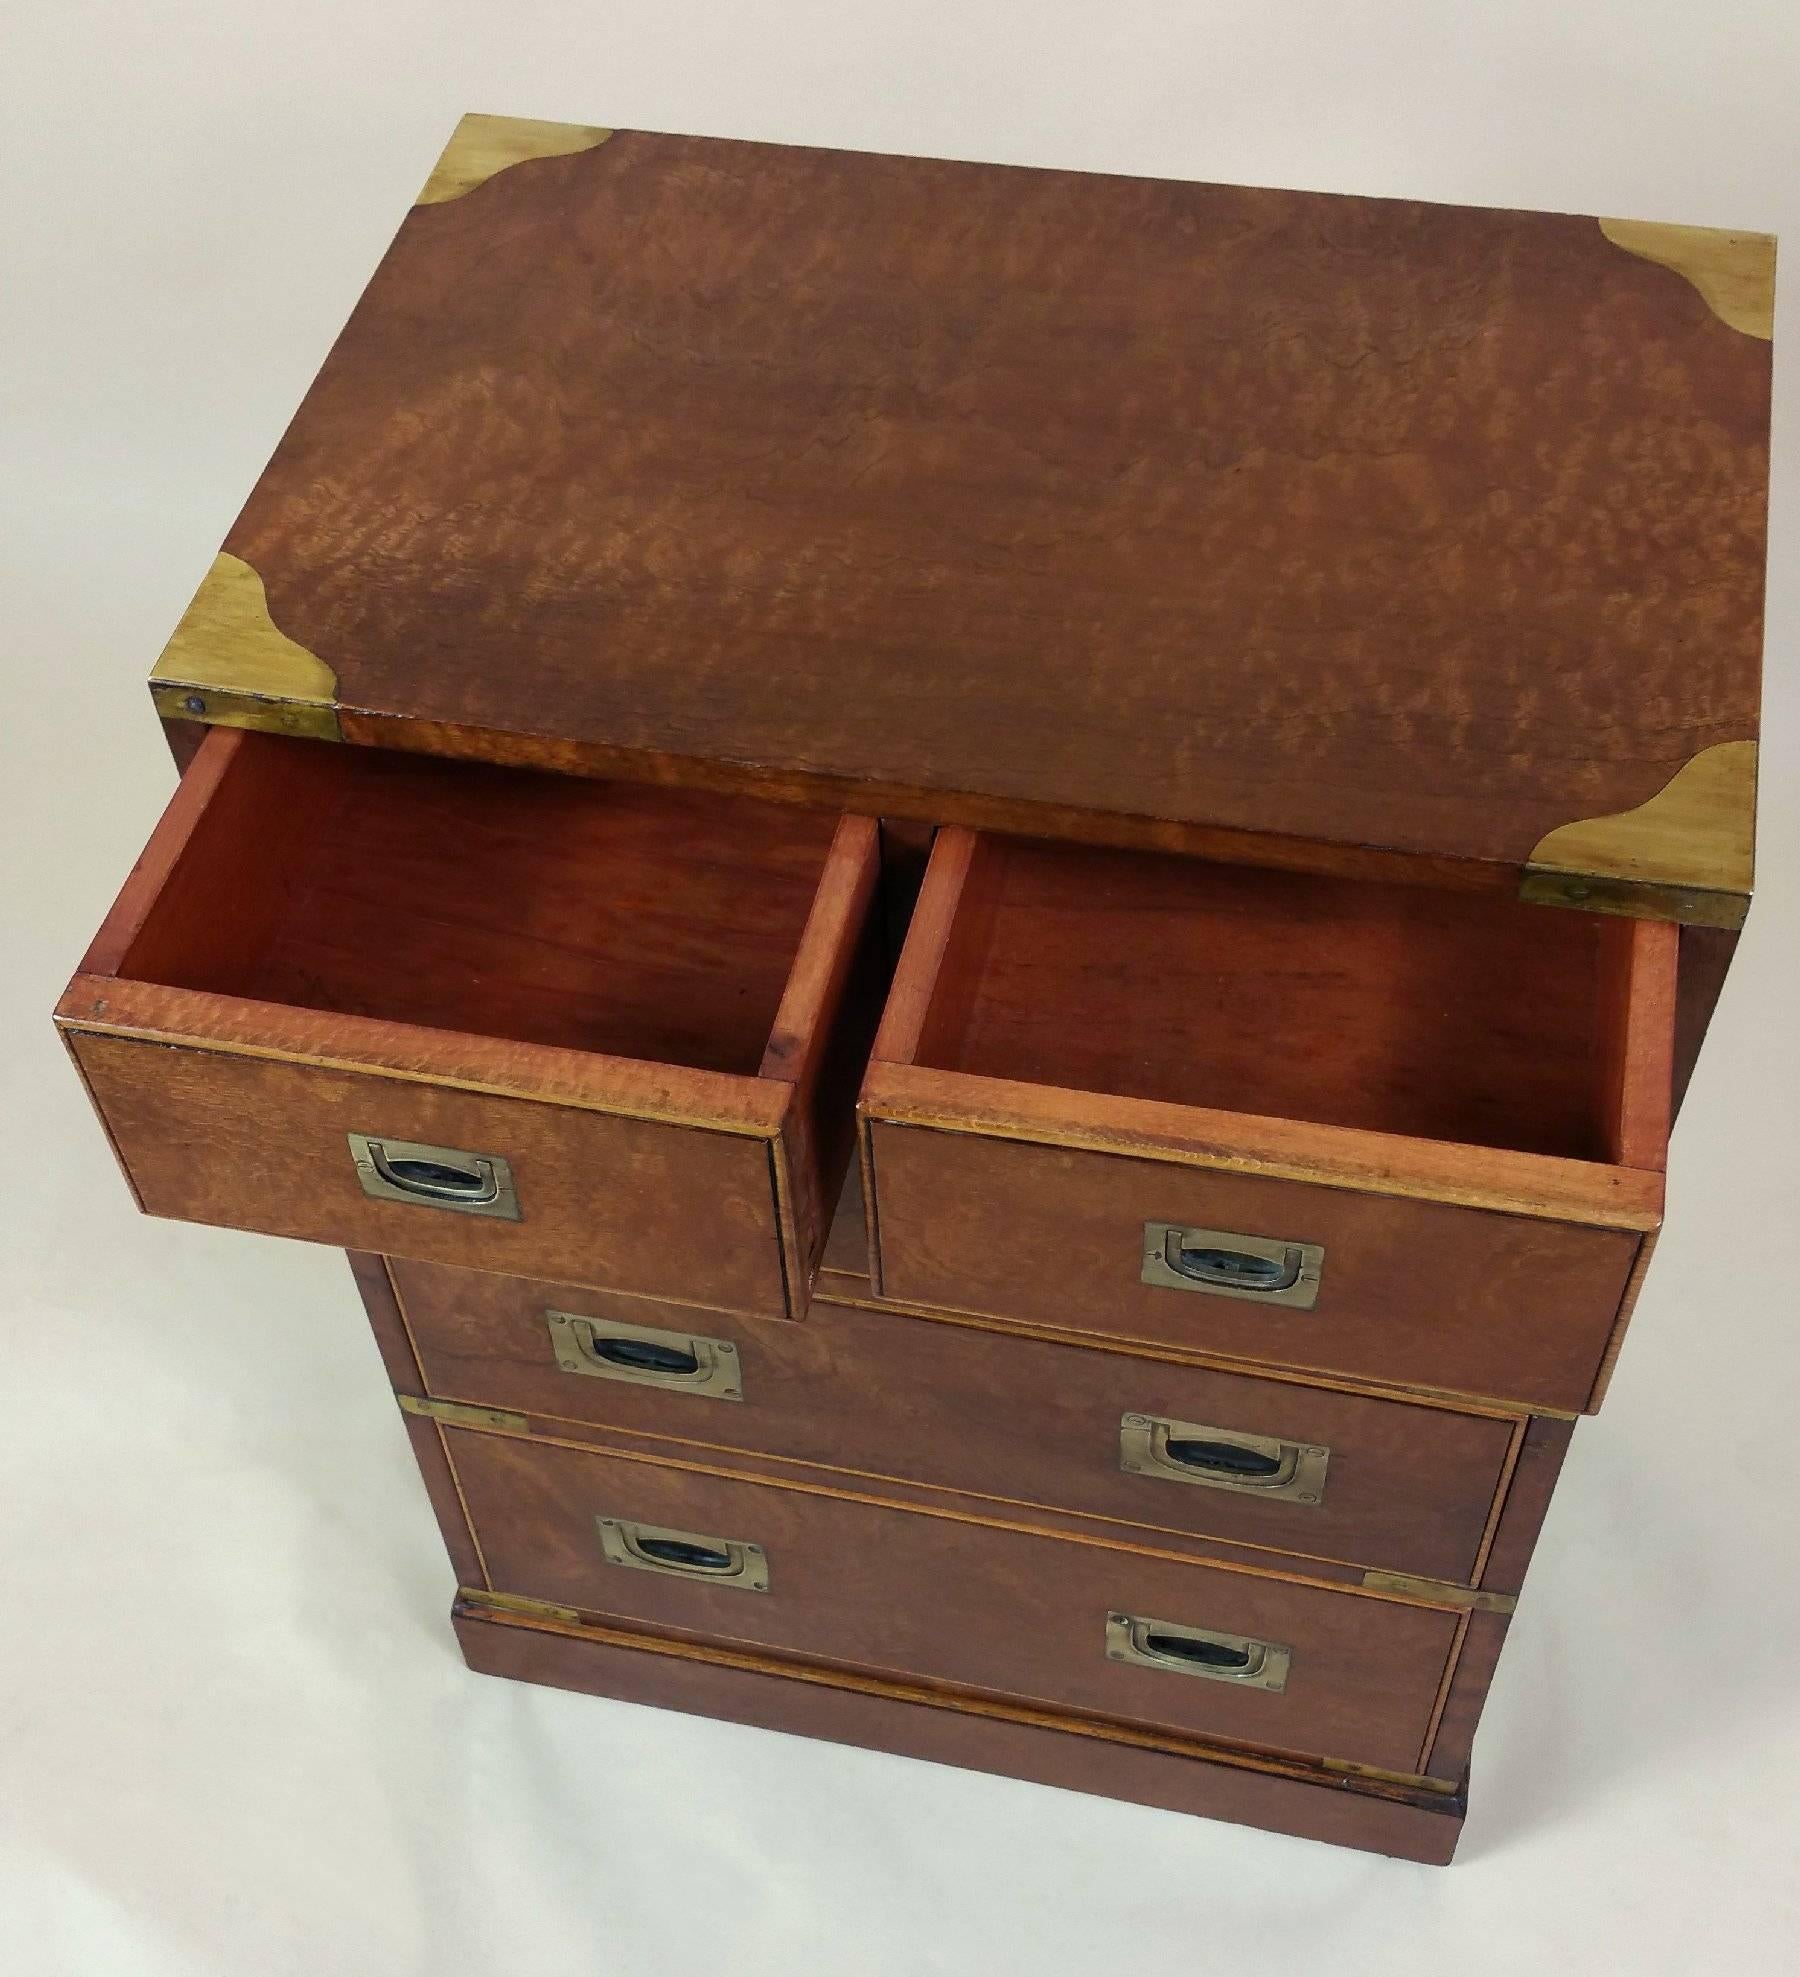 This striking and very well proportioned satinwood military chest features brass trim and handles, as well as side carrying handles. The chest has two top drawers with three long drawers beneath. It measures 21 in - 53.3 cm wide, 13 3/4 in - 35 cm